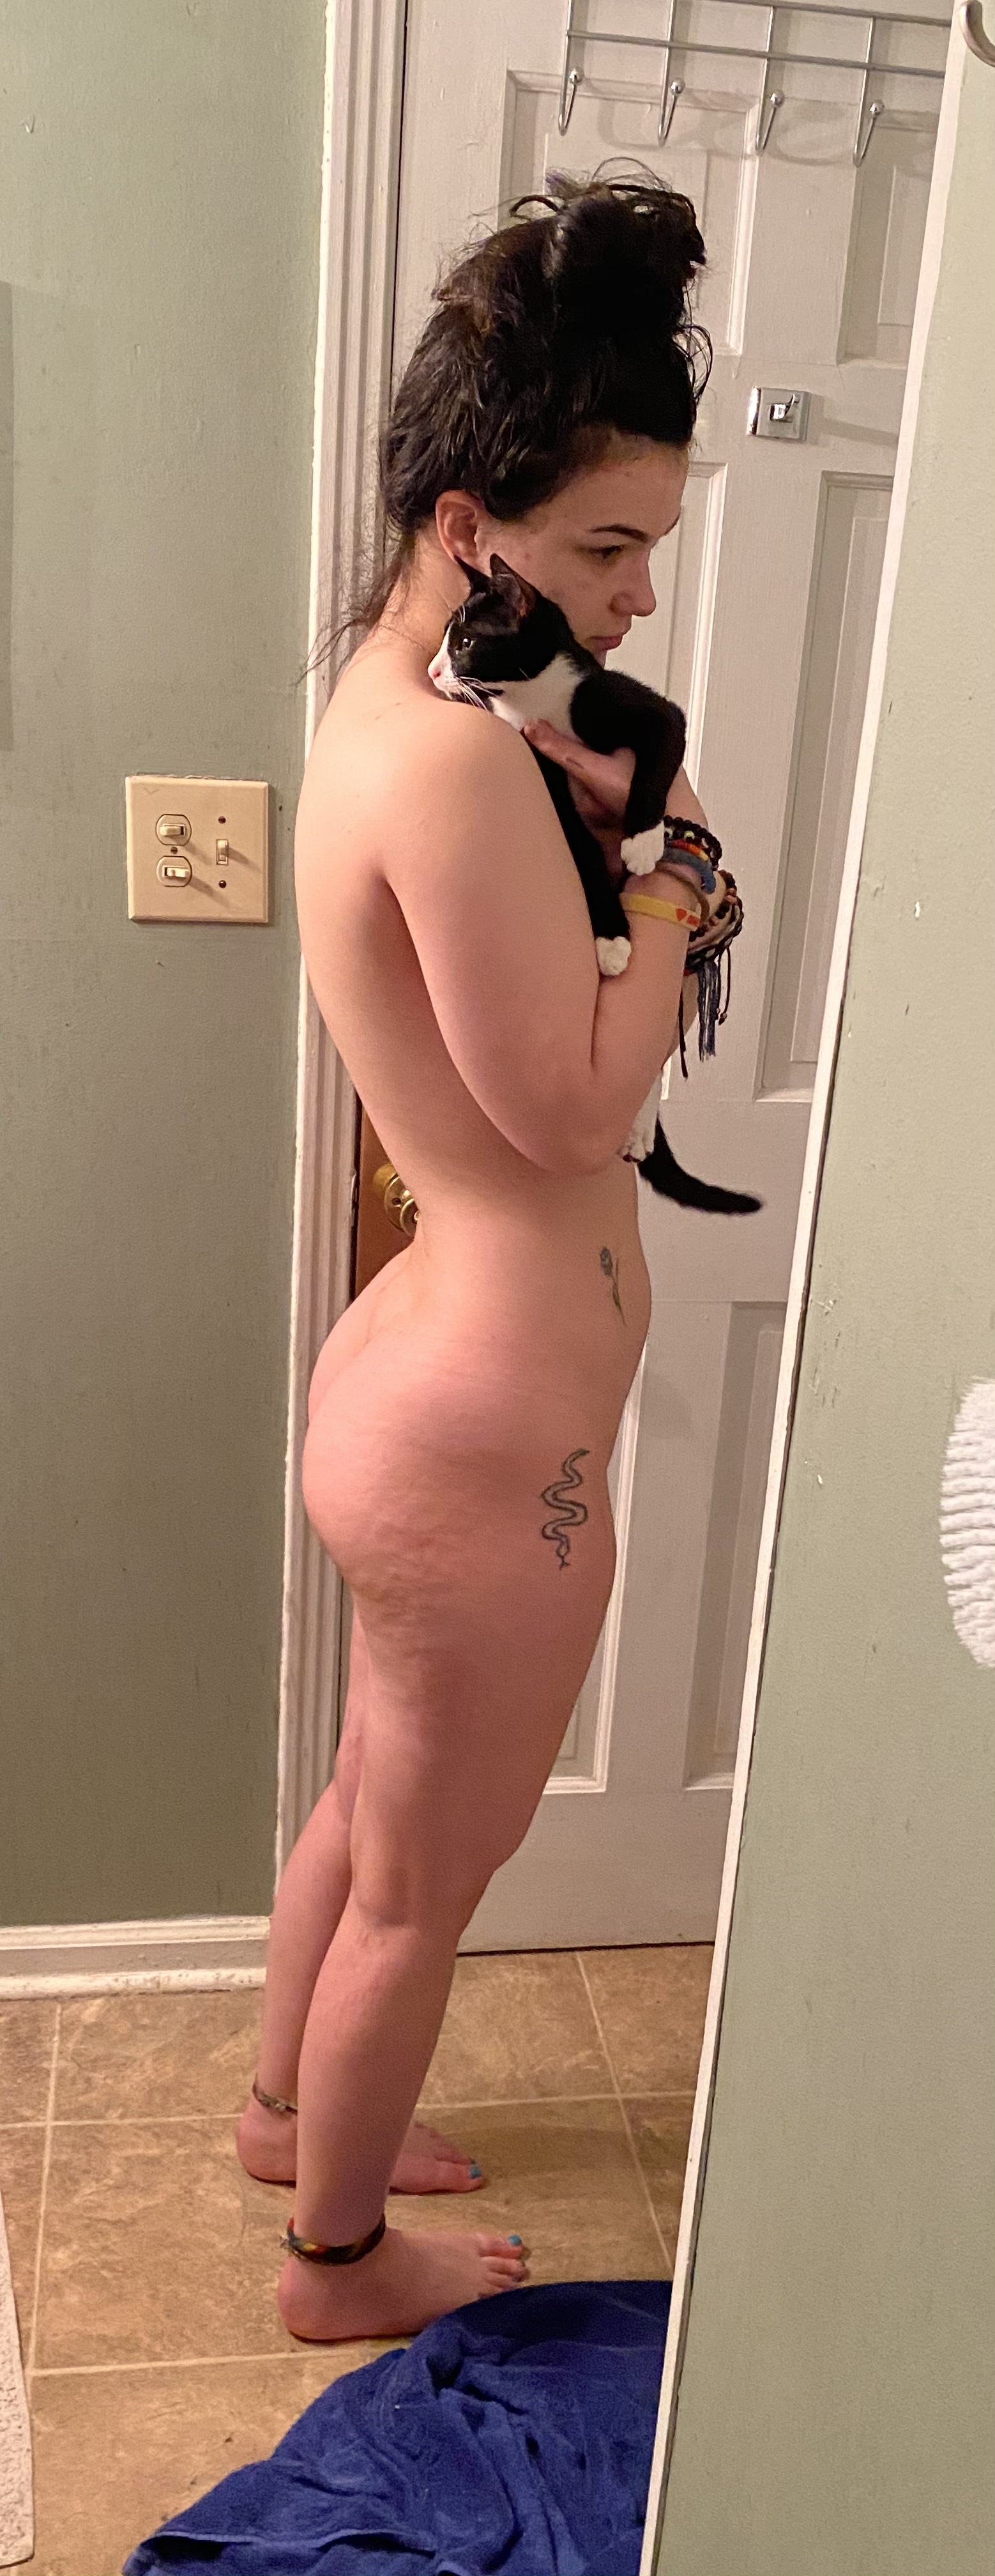 More of my body for you to enjoy